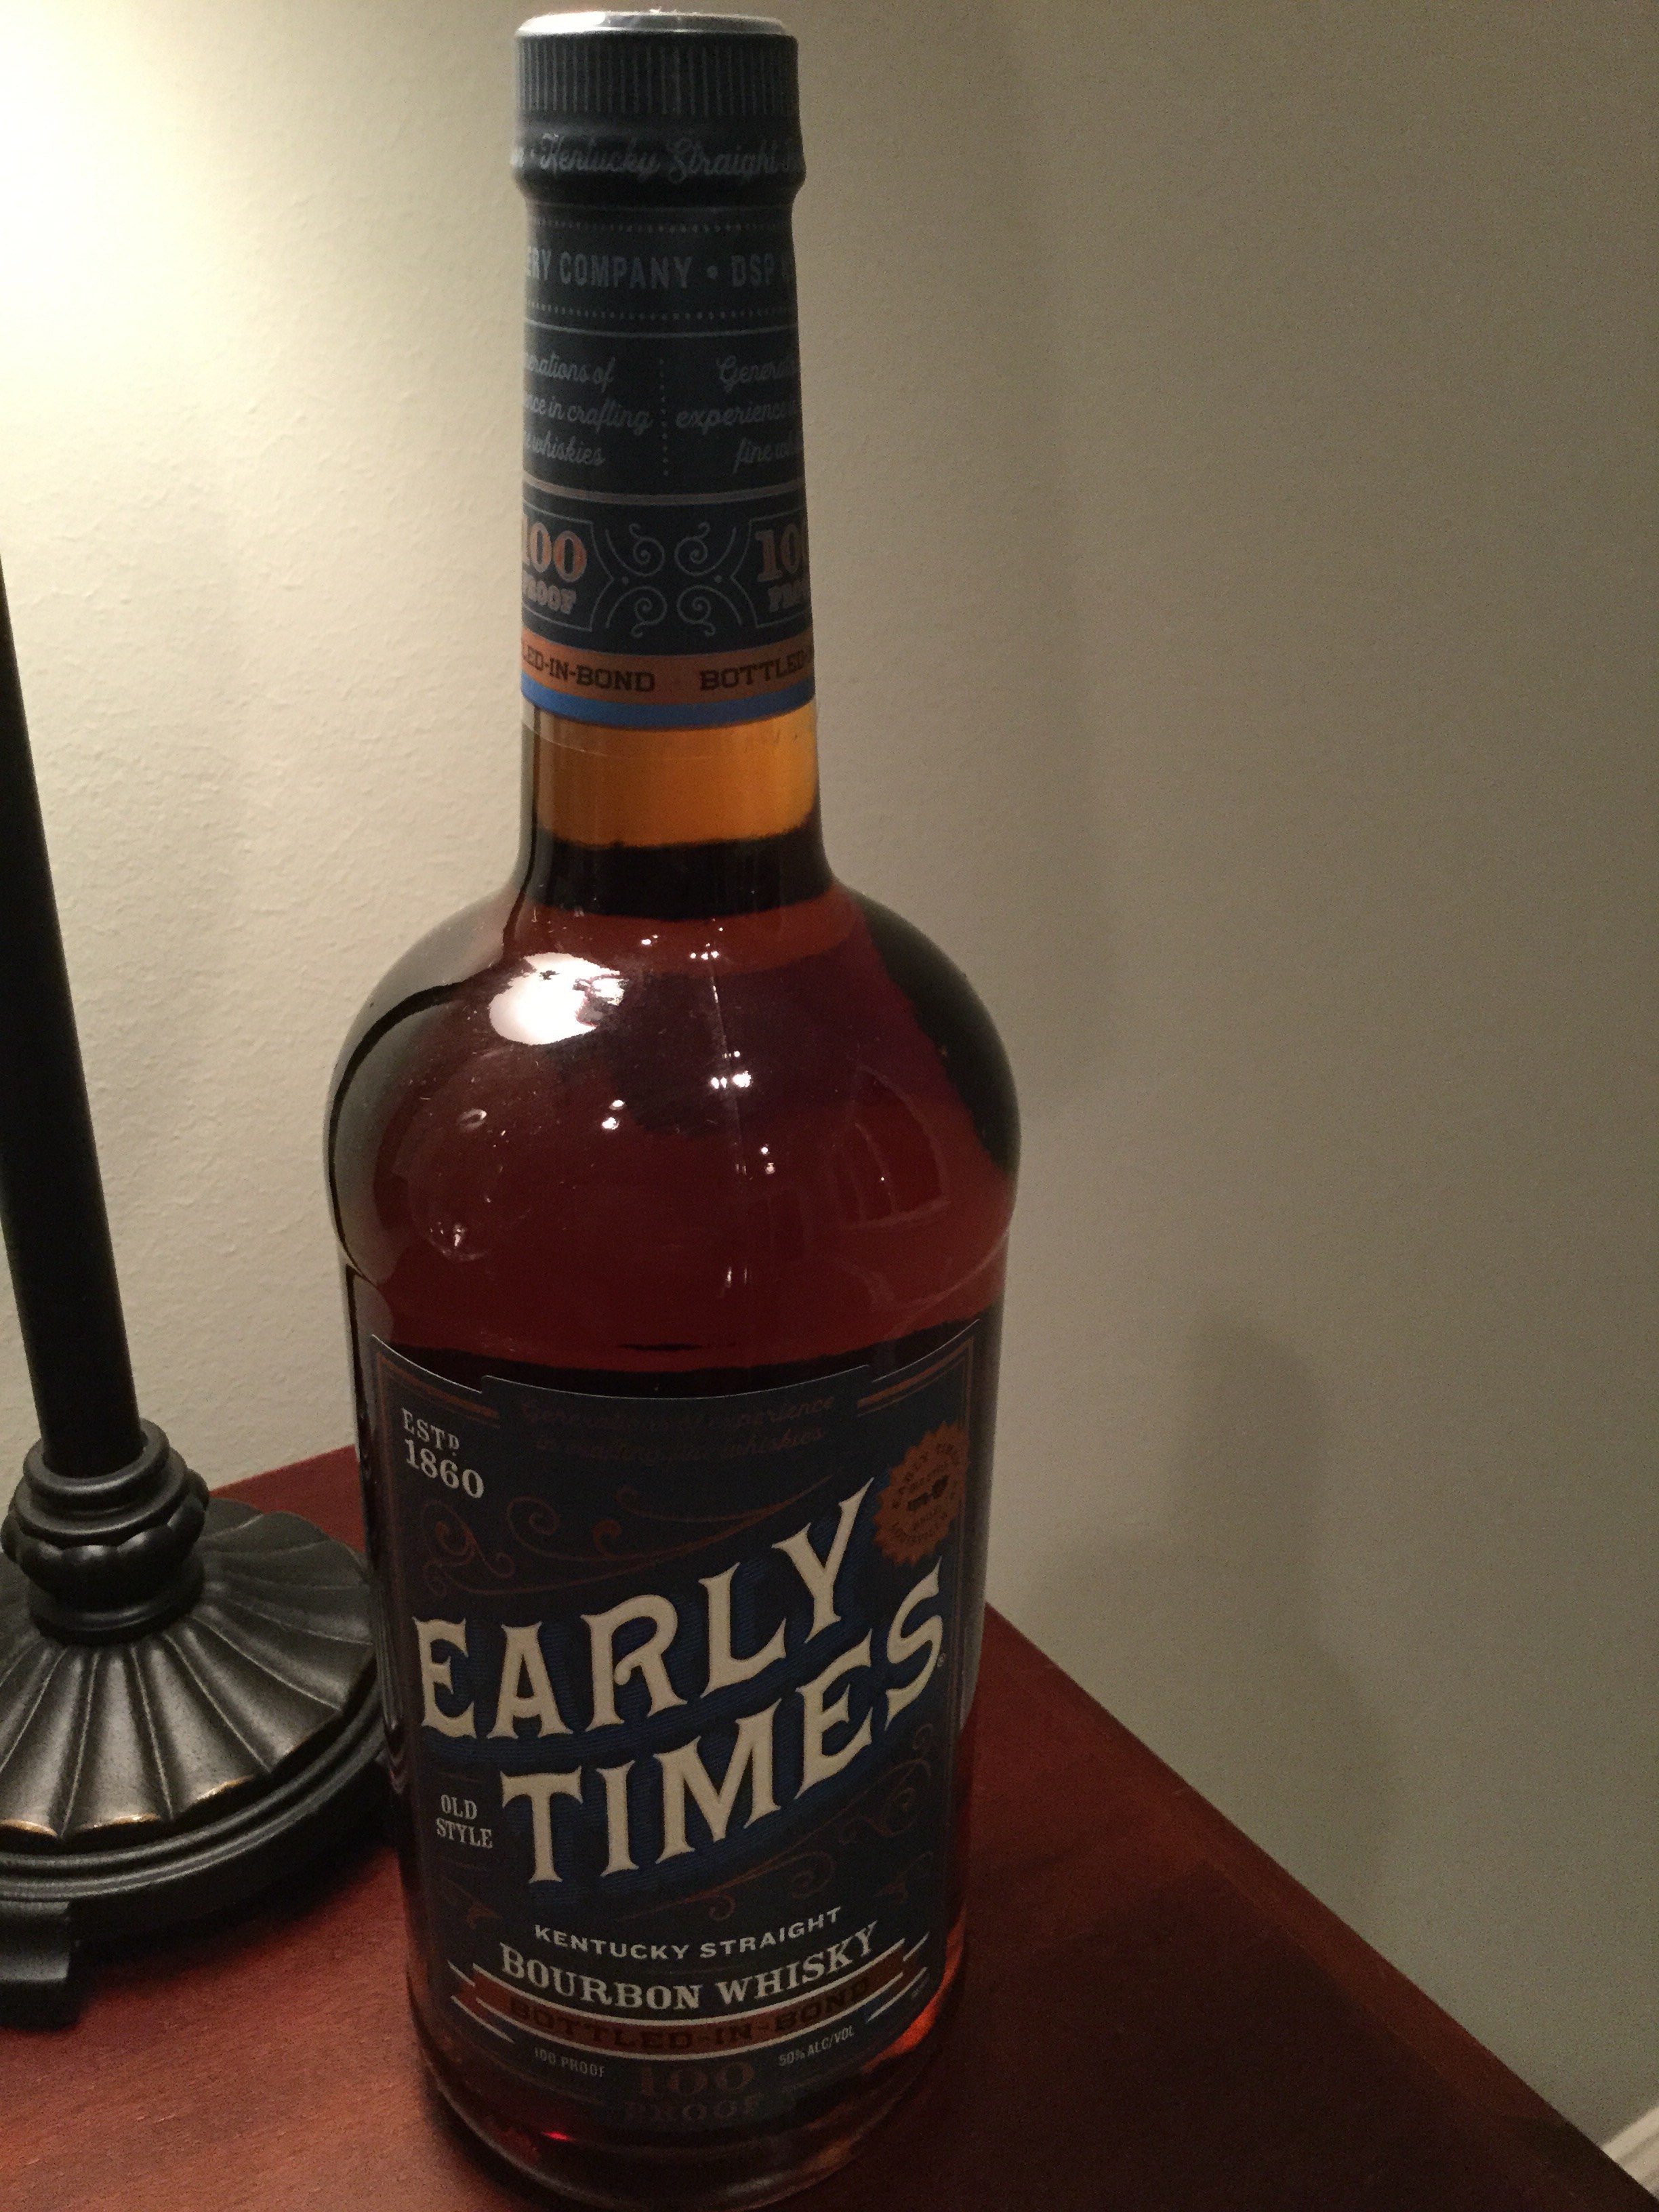 Early Times Bottled in Bond "special edition" General